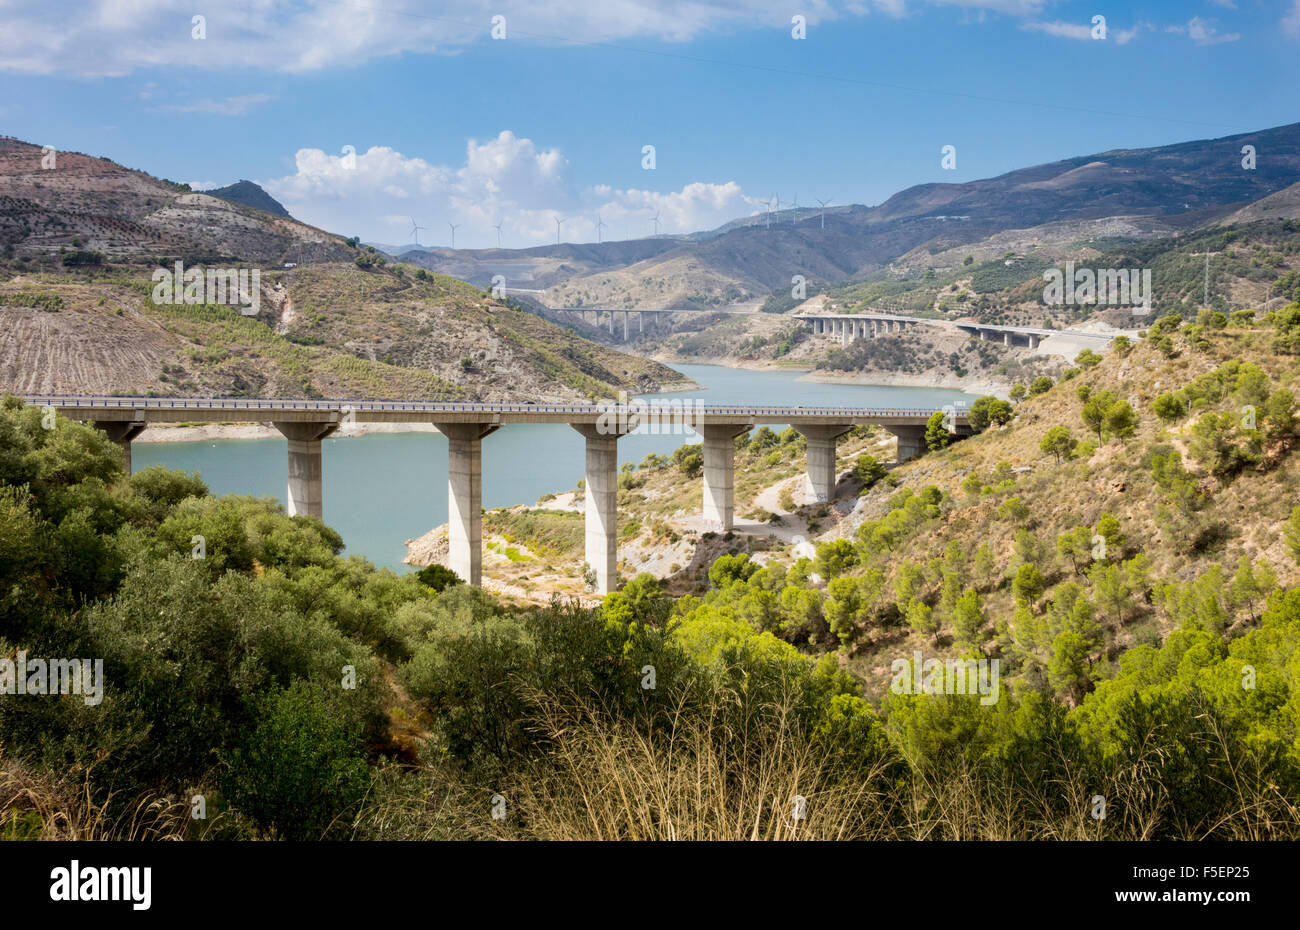 A44 motorway crosses Rules Reservoir and RIo Guadalfeo, through Sierra Nevada Mountains, Andalusia, Spain Stock Photo